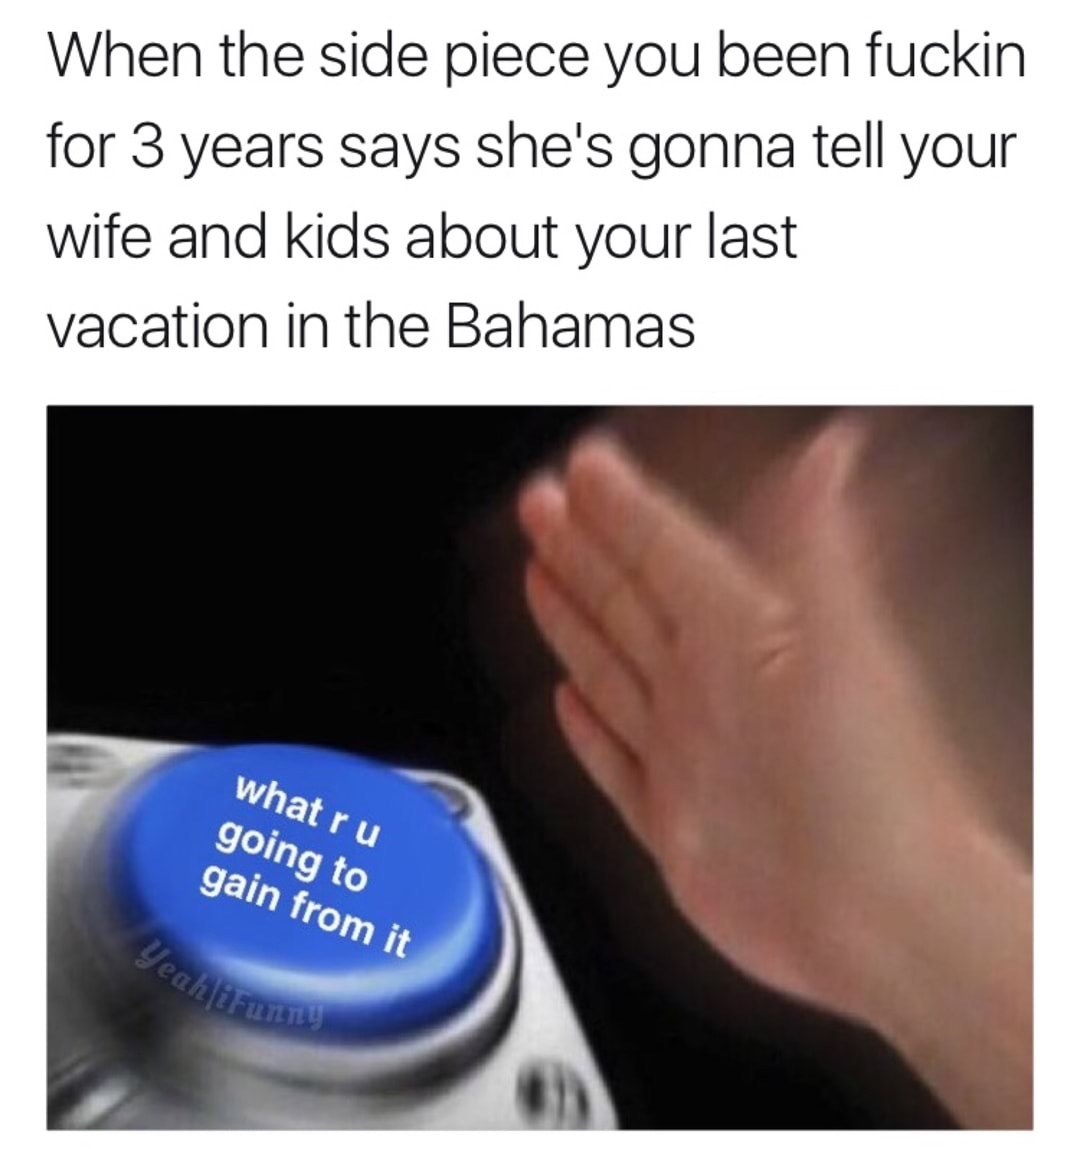 funny relationship memes - When the side piece you been fuckin for 3 years says she's gonna tell your wife and kids about your last vacation in the Bahamas what ru going to gain from it YeahAFT